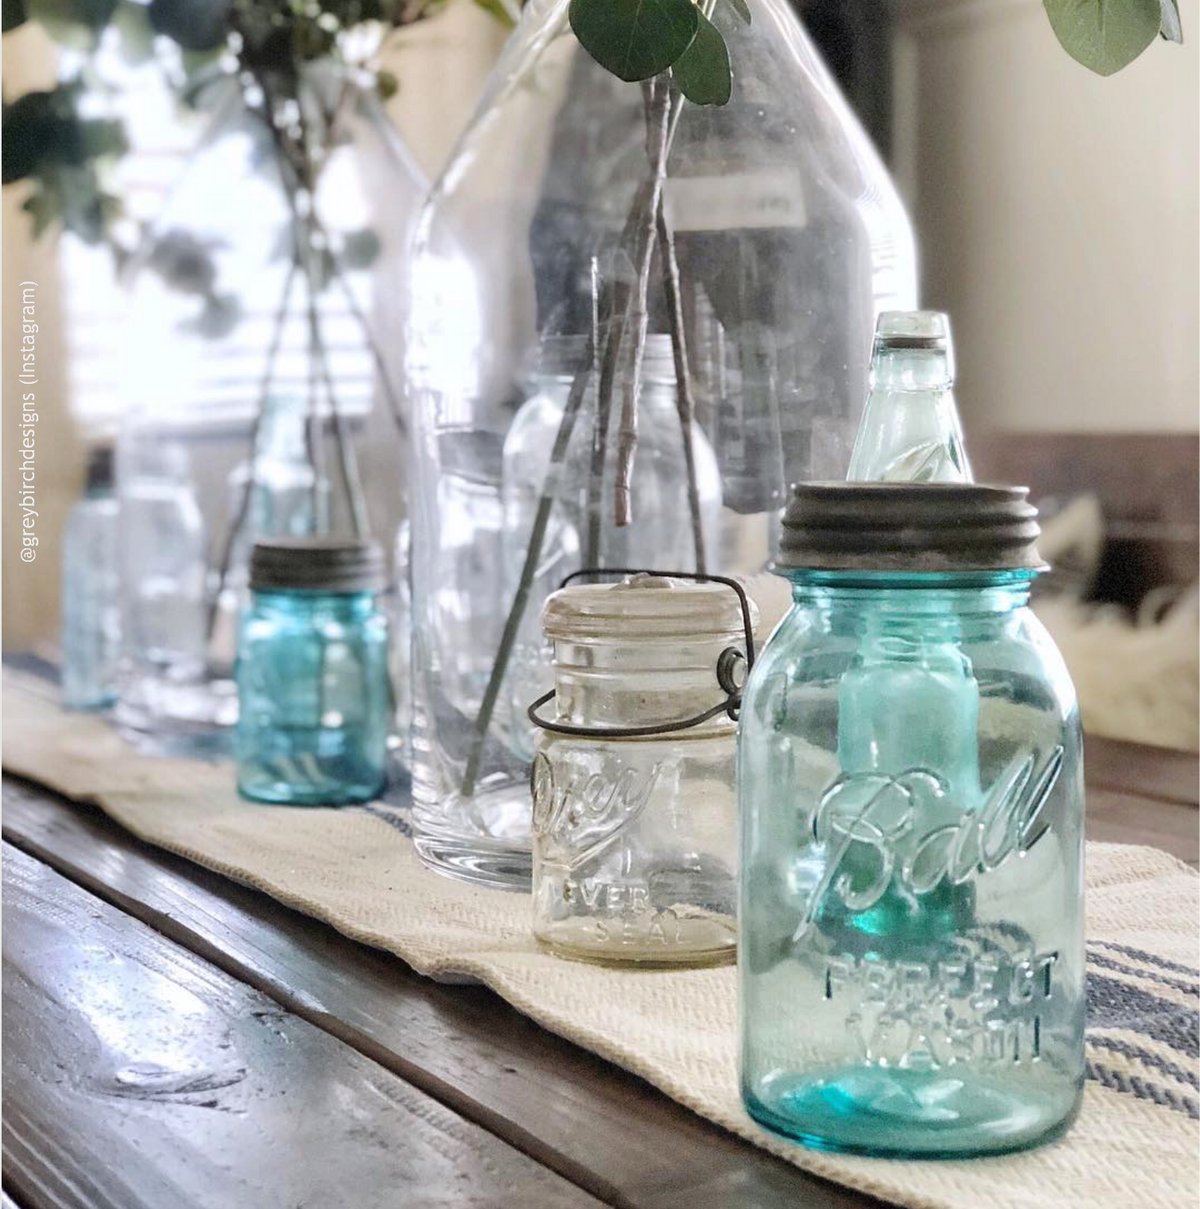 A variety of mason jars on a table, including a blue Ball mason jar with a zinc lid in the foreground